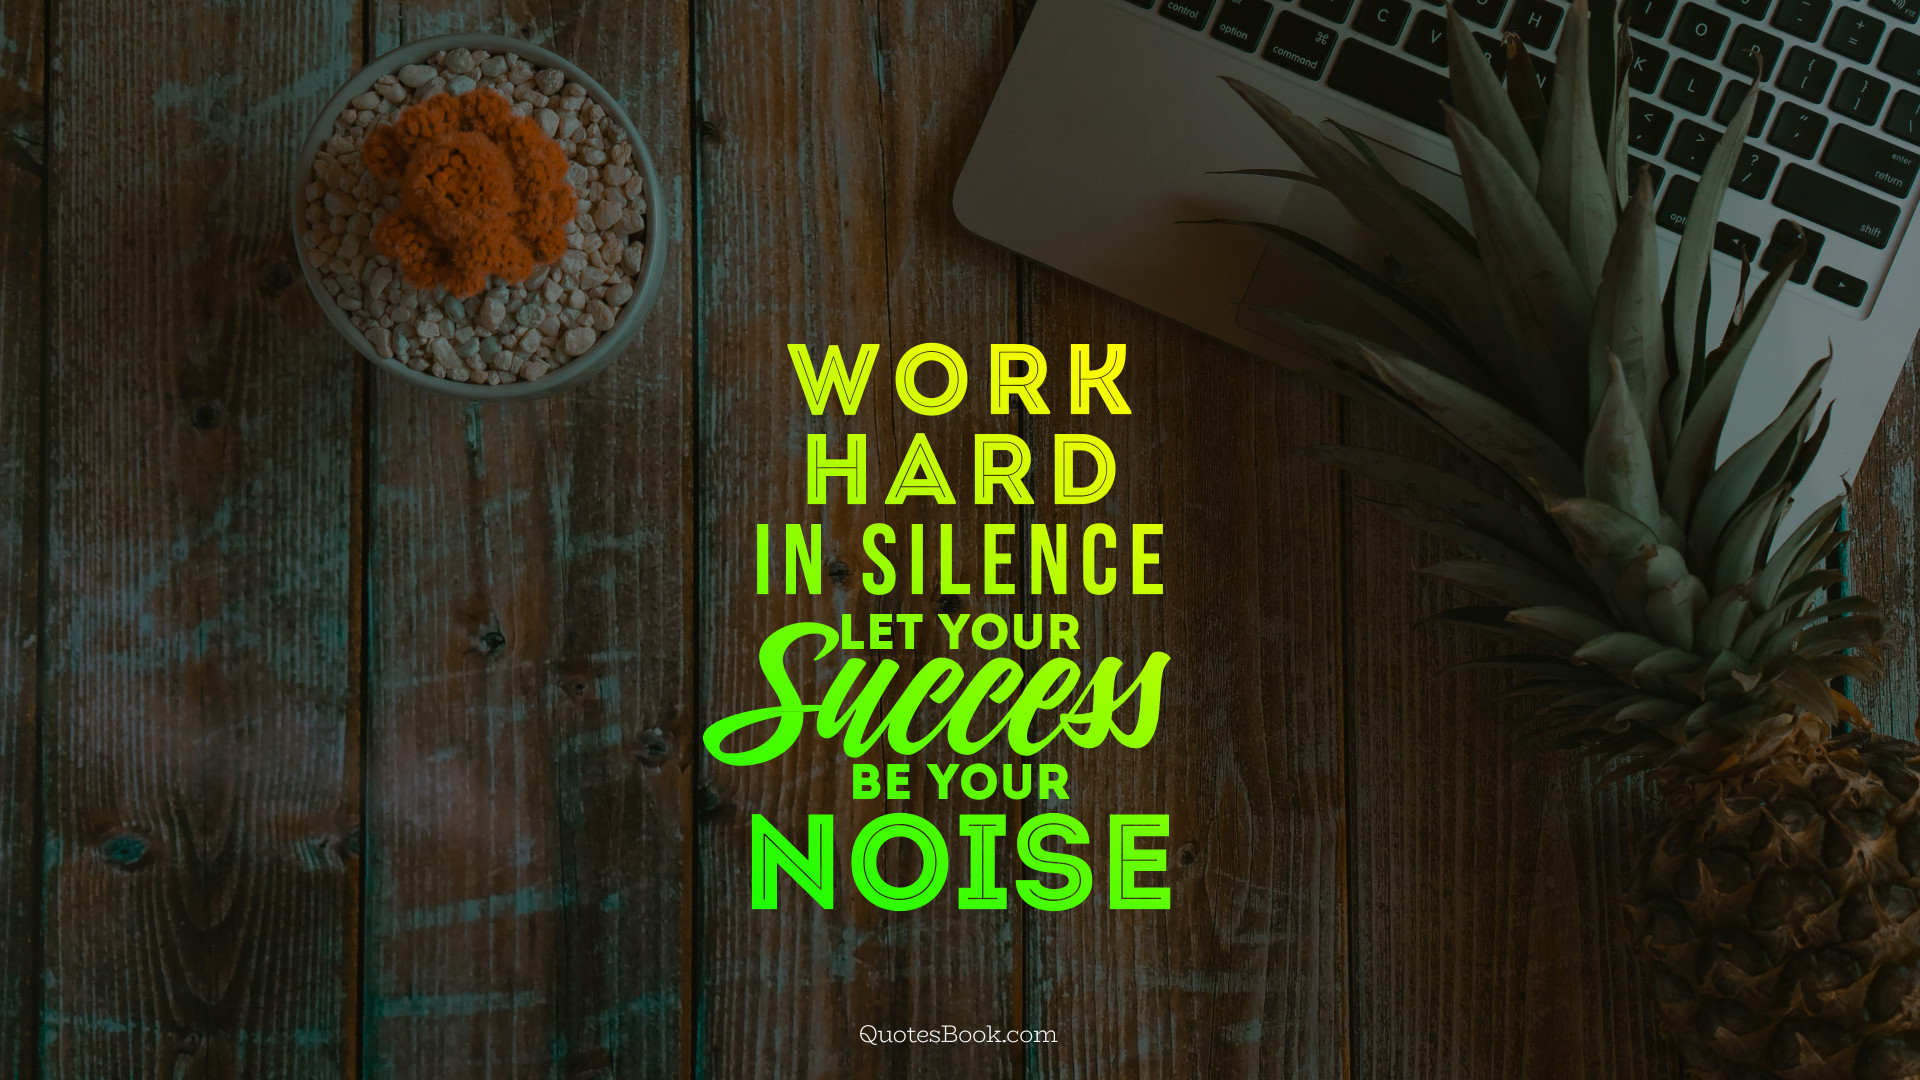 Work hard in silence let your success be your noise. - Quote by John